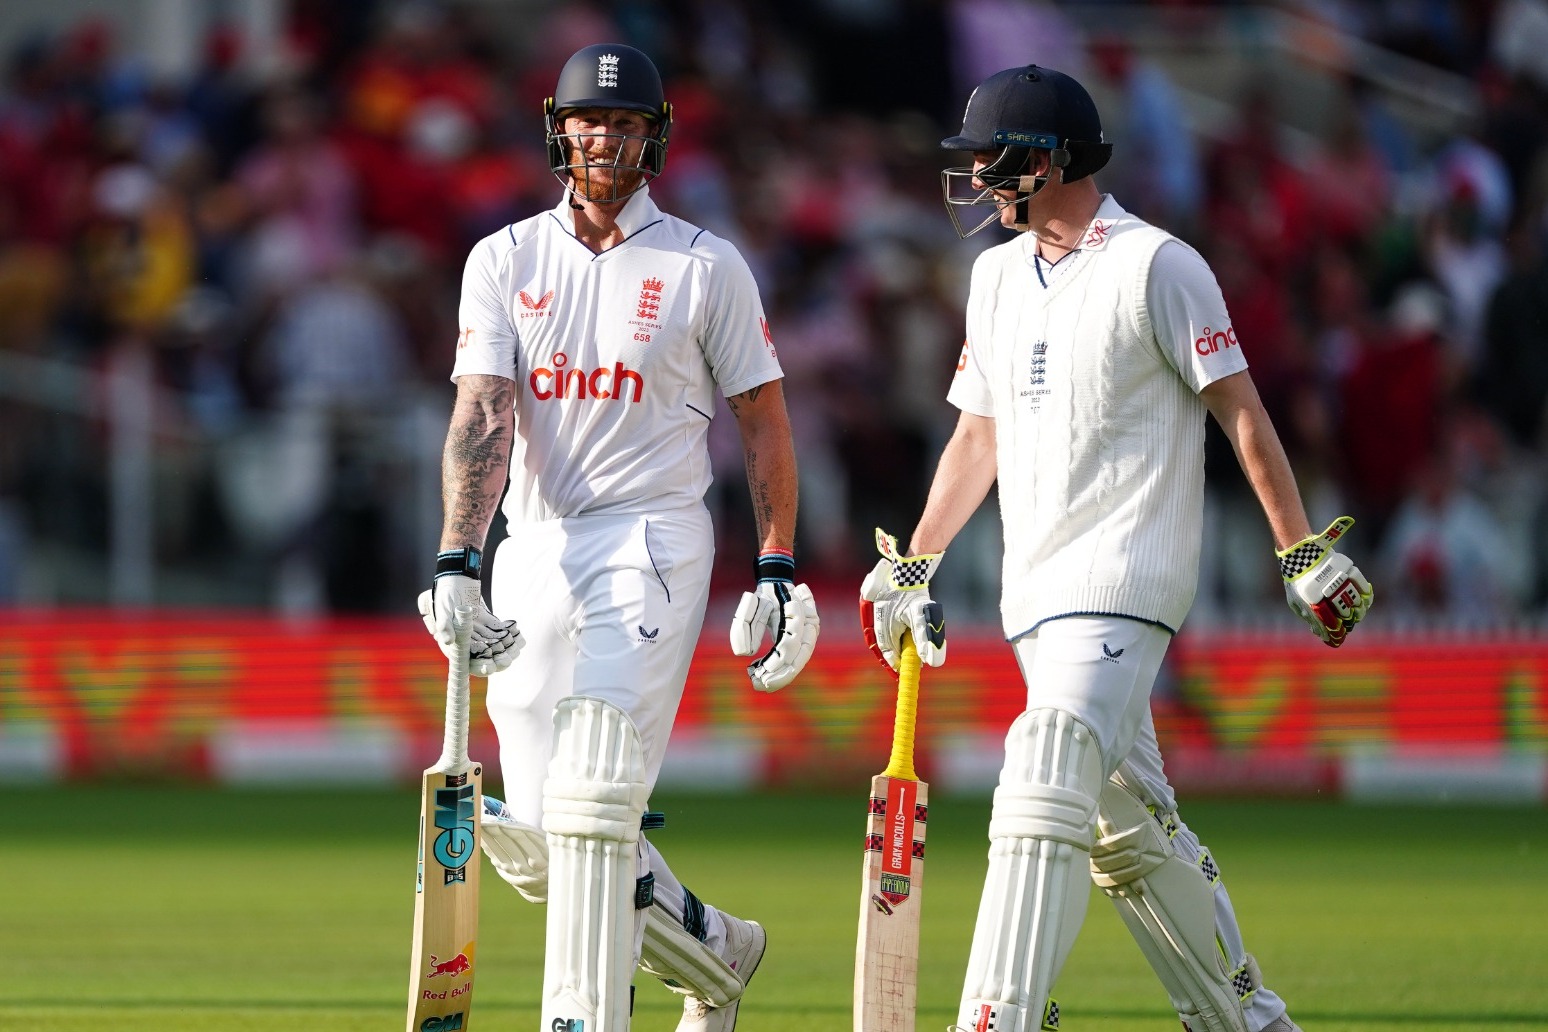 Ashes battle back in balance as England fight back 